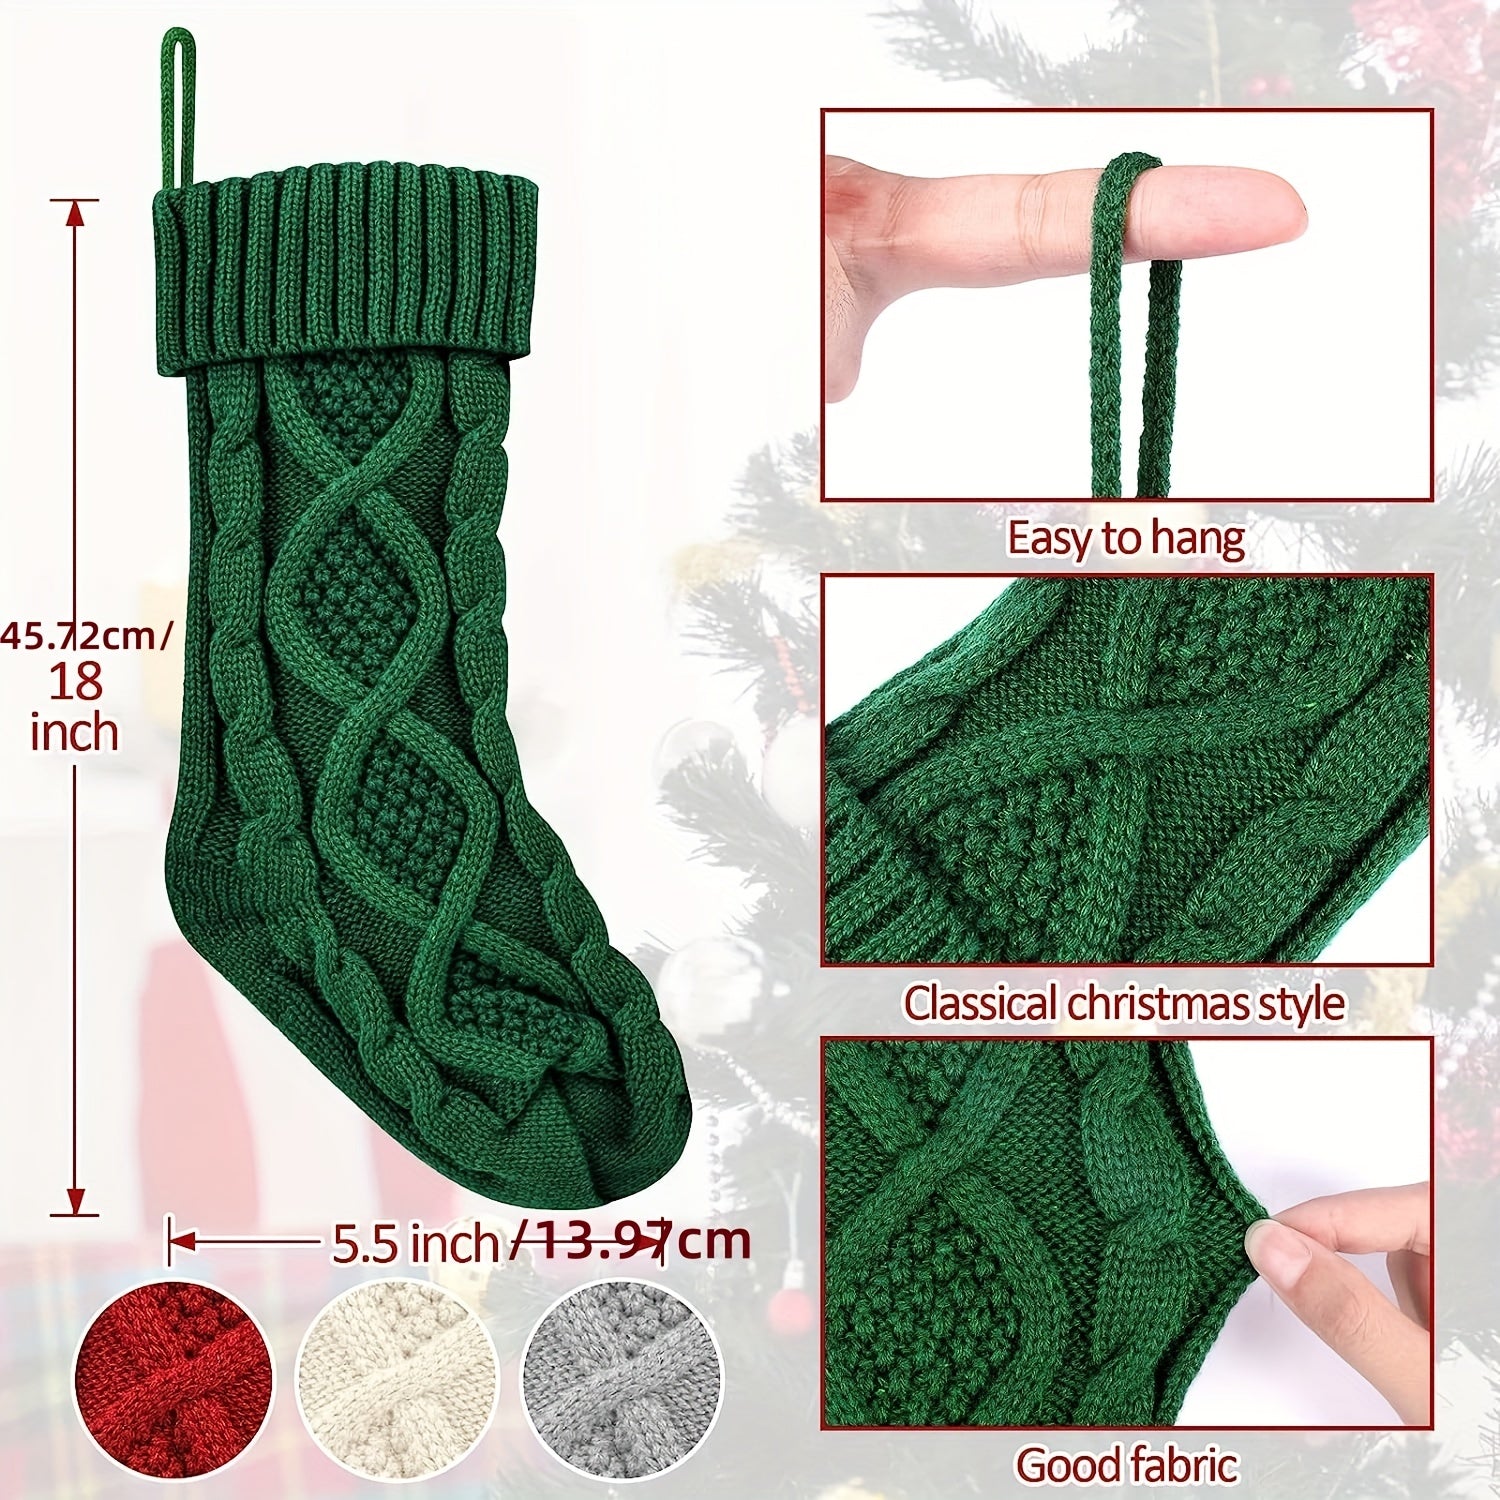 4pcs  Large  Knitted Christmas Socks With Christmas Decorations In Ivory, Burgundy, Gray, And Green Stockings Suitable For Fireplaces, Christmas Trees, Families, Holiday Parties, And Decorations